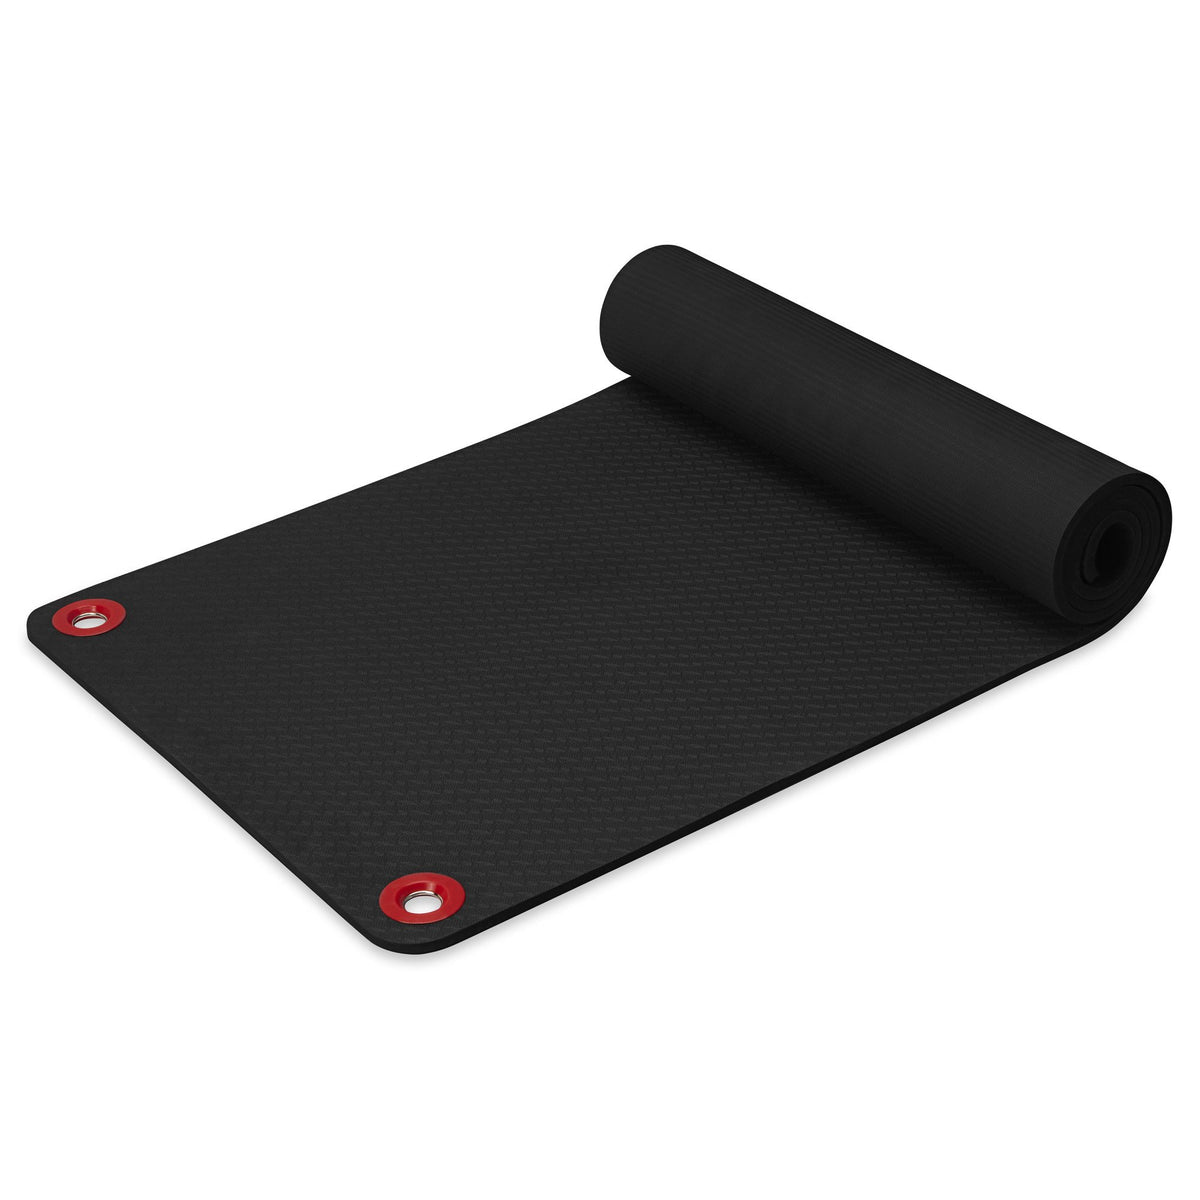 Spri Hanging Exercise Mat 71-Inch x 23-Inch x 3/8-Inch